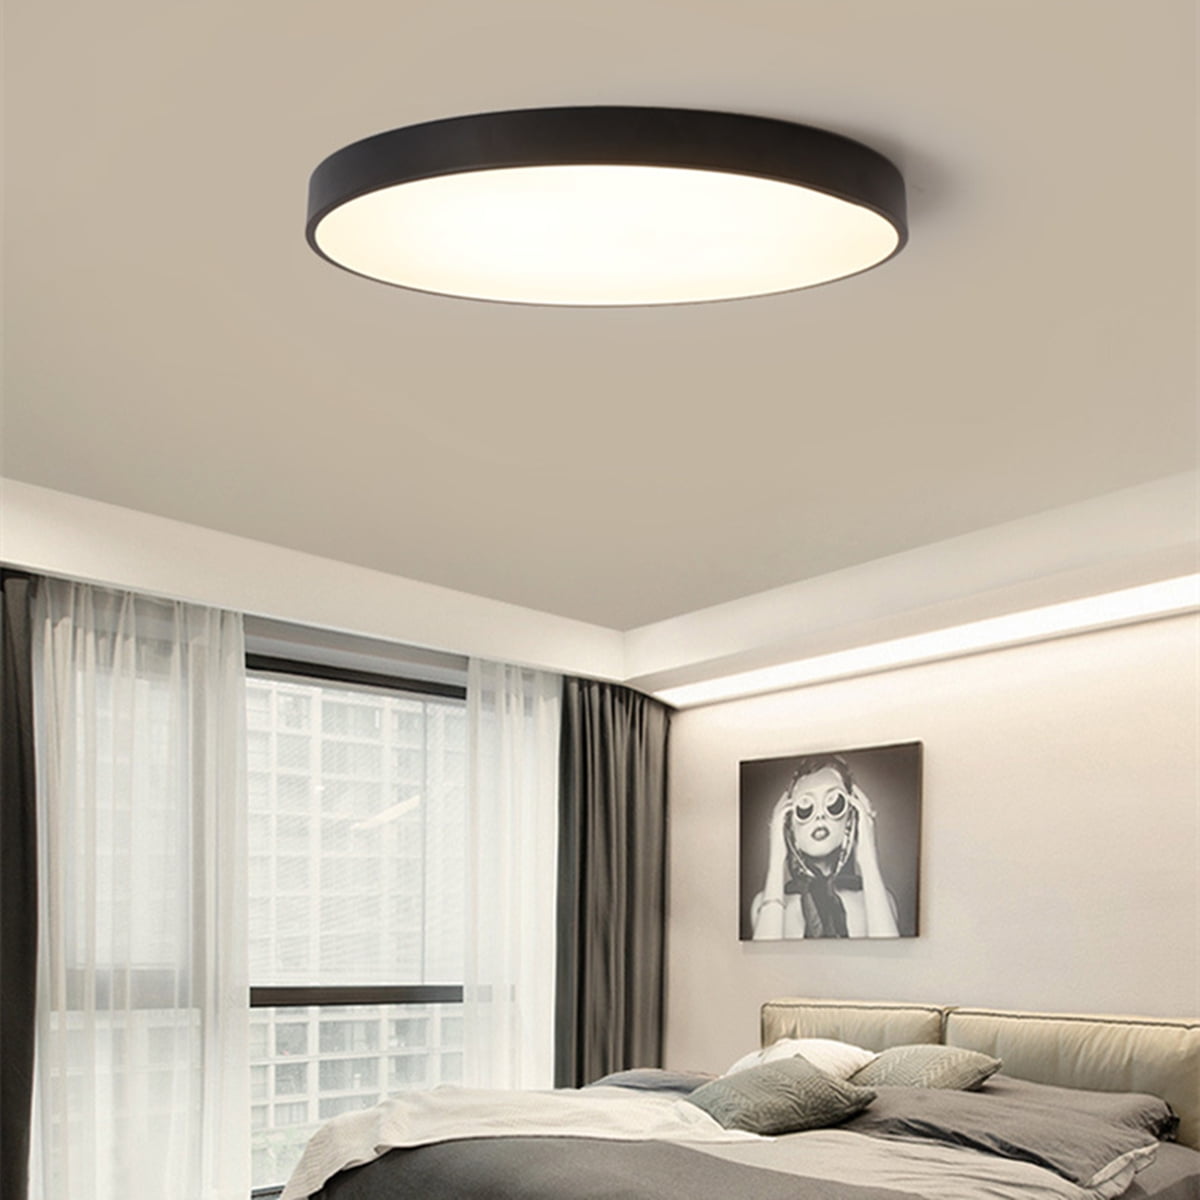 LED Ceiling Lamp Remote Control Crystal Dimmable Lighting Fixtures Ceiling Light 